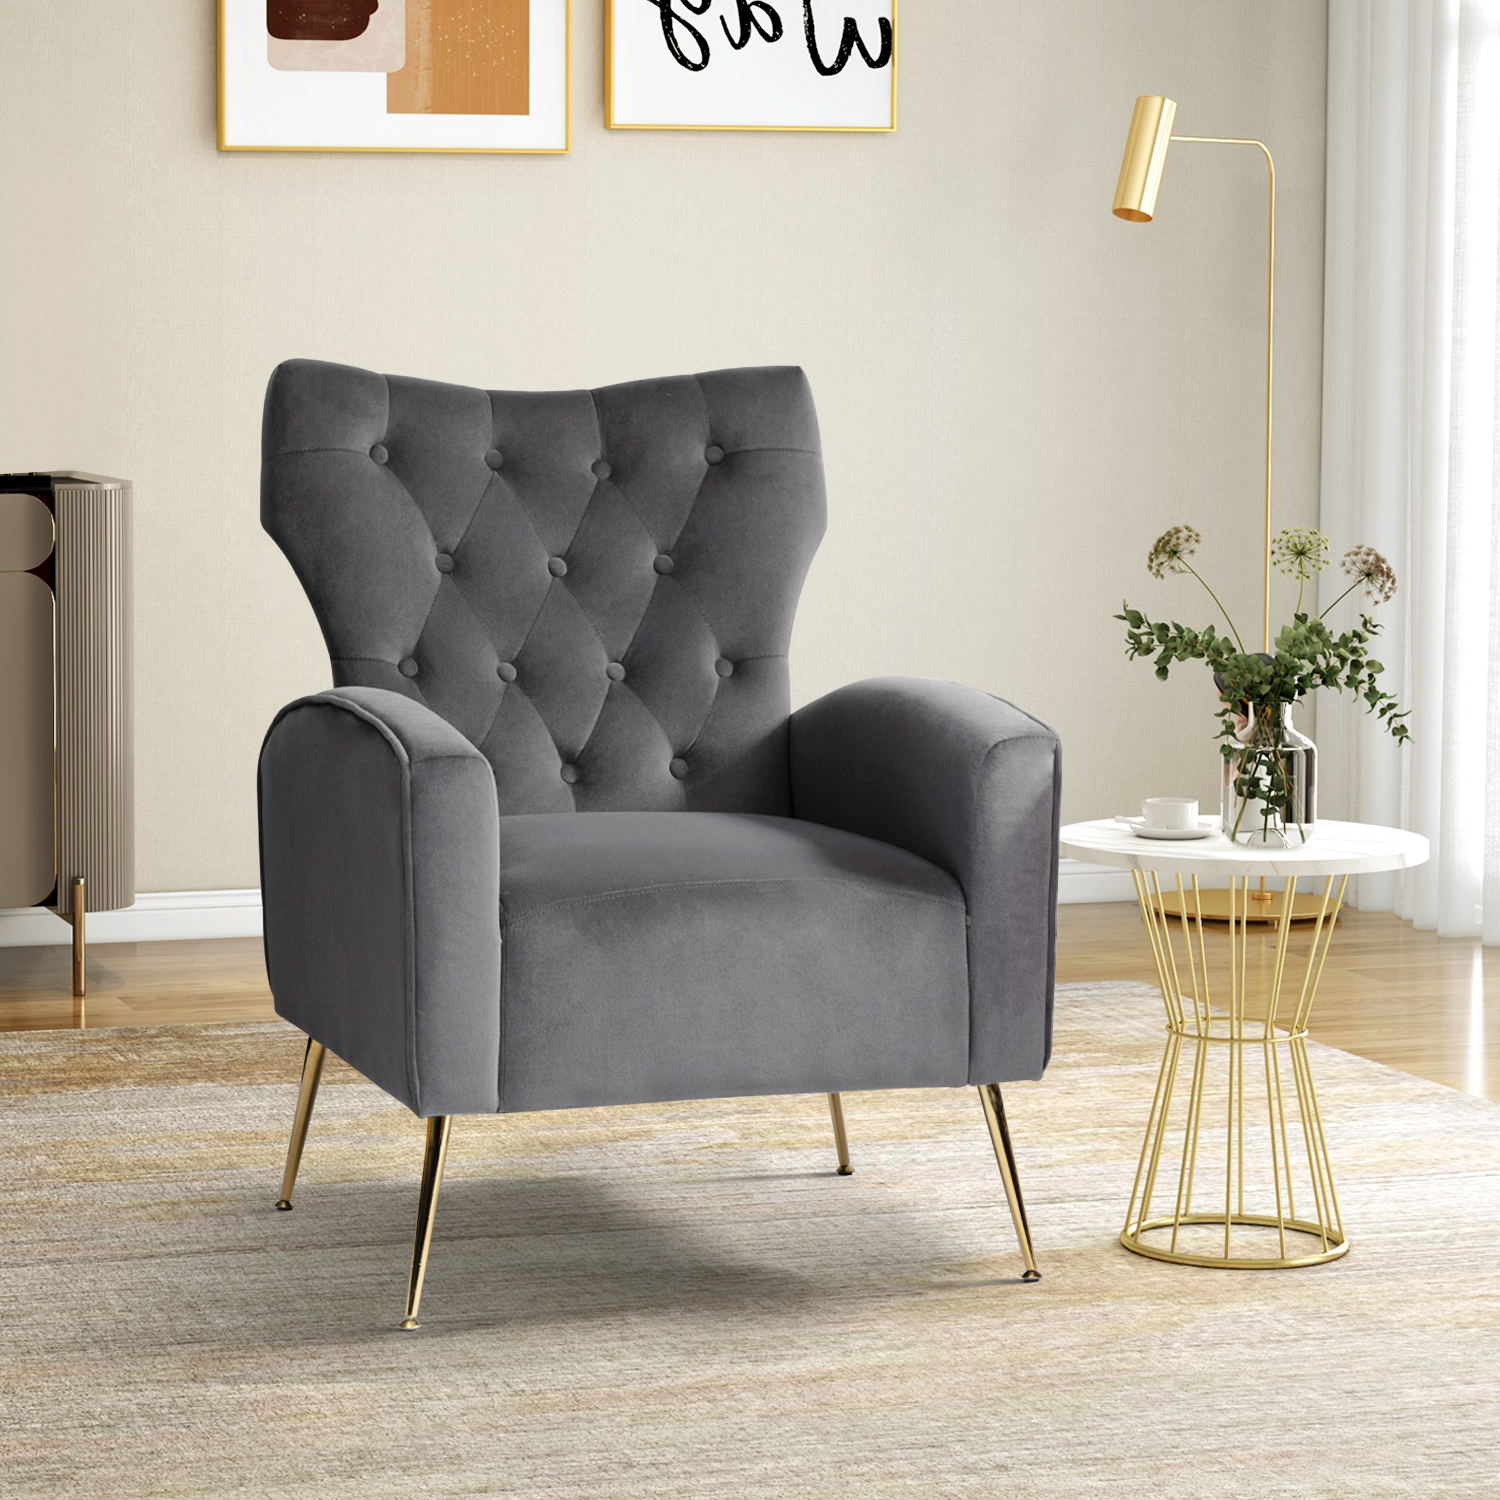 Modern Velvet Accent Chair Upholstered Sofa Armchair Button Tufted Metal Legs Adult Bedroom Home Living Room Grey - image 1 of 9